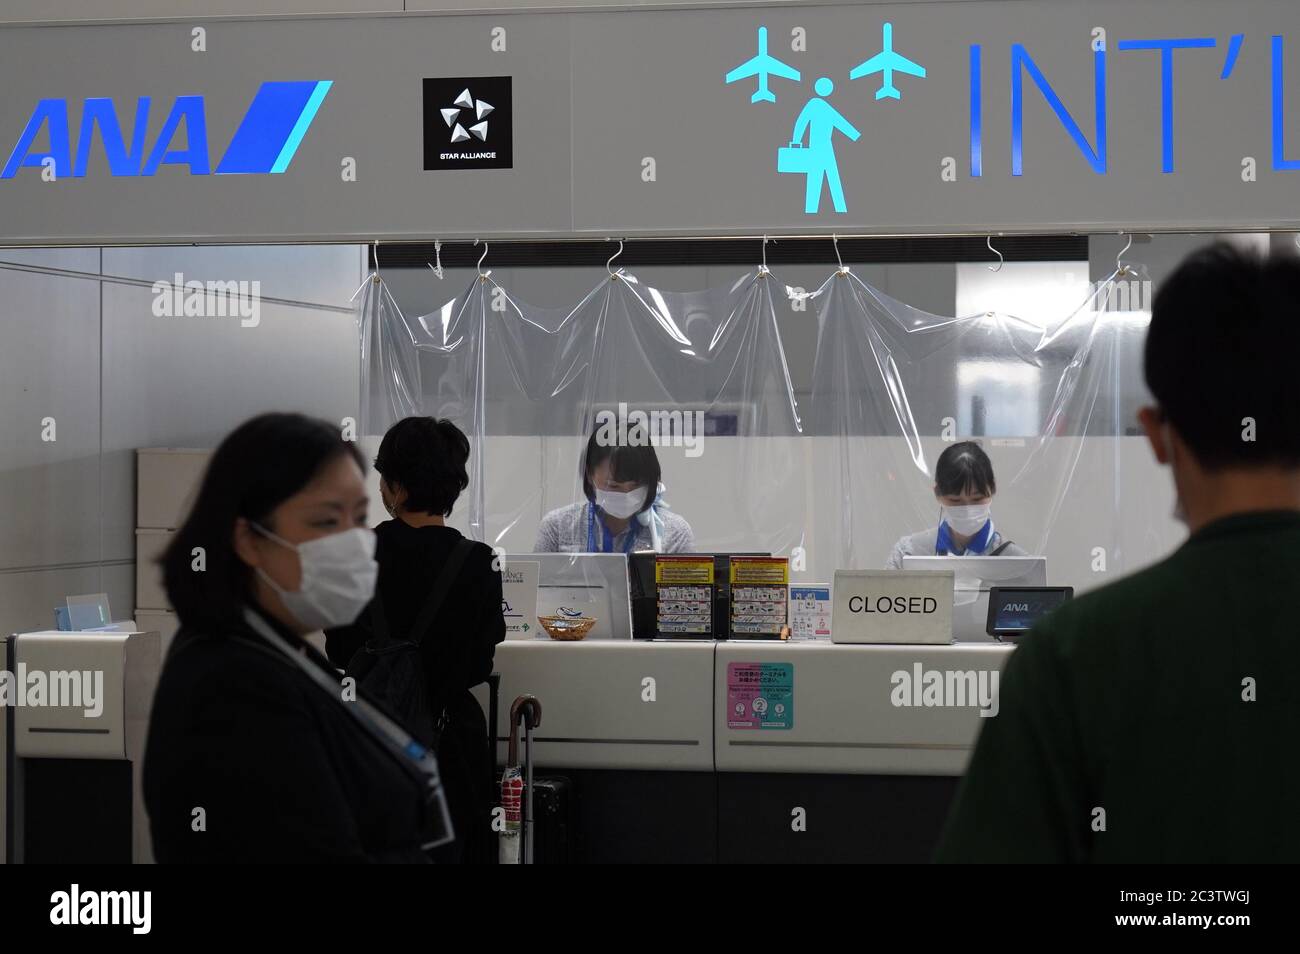 Airline staff attend to passengers while wearing face masks as a preventive measure at the Chubu Centrair International Airport.Japan's government lifted all COVID-19 related restrictions on domestic travels on June 19 while most of the international flights remain cancelled. Stock Photo